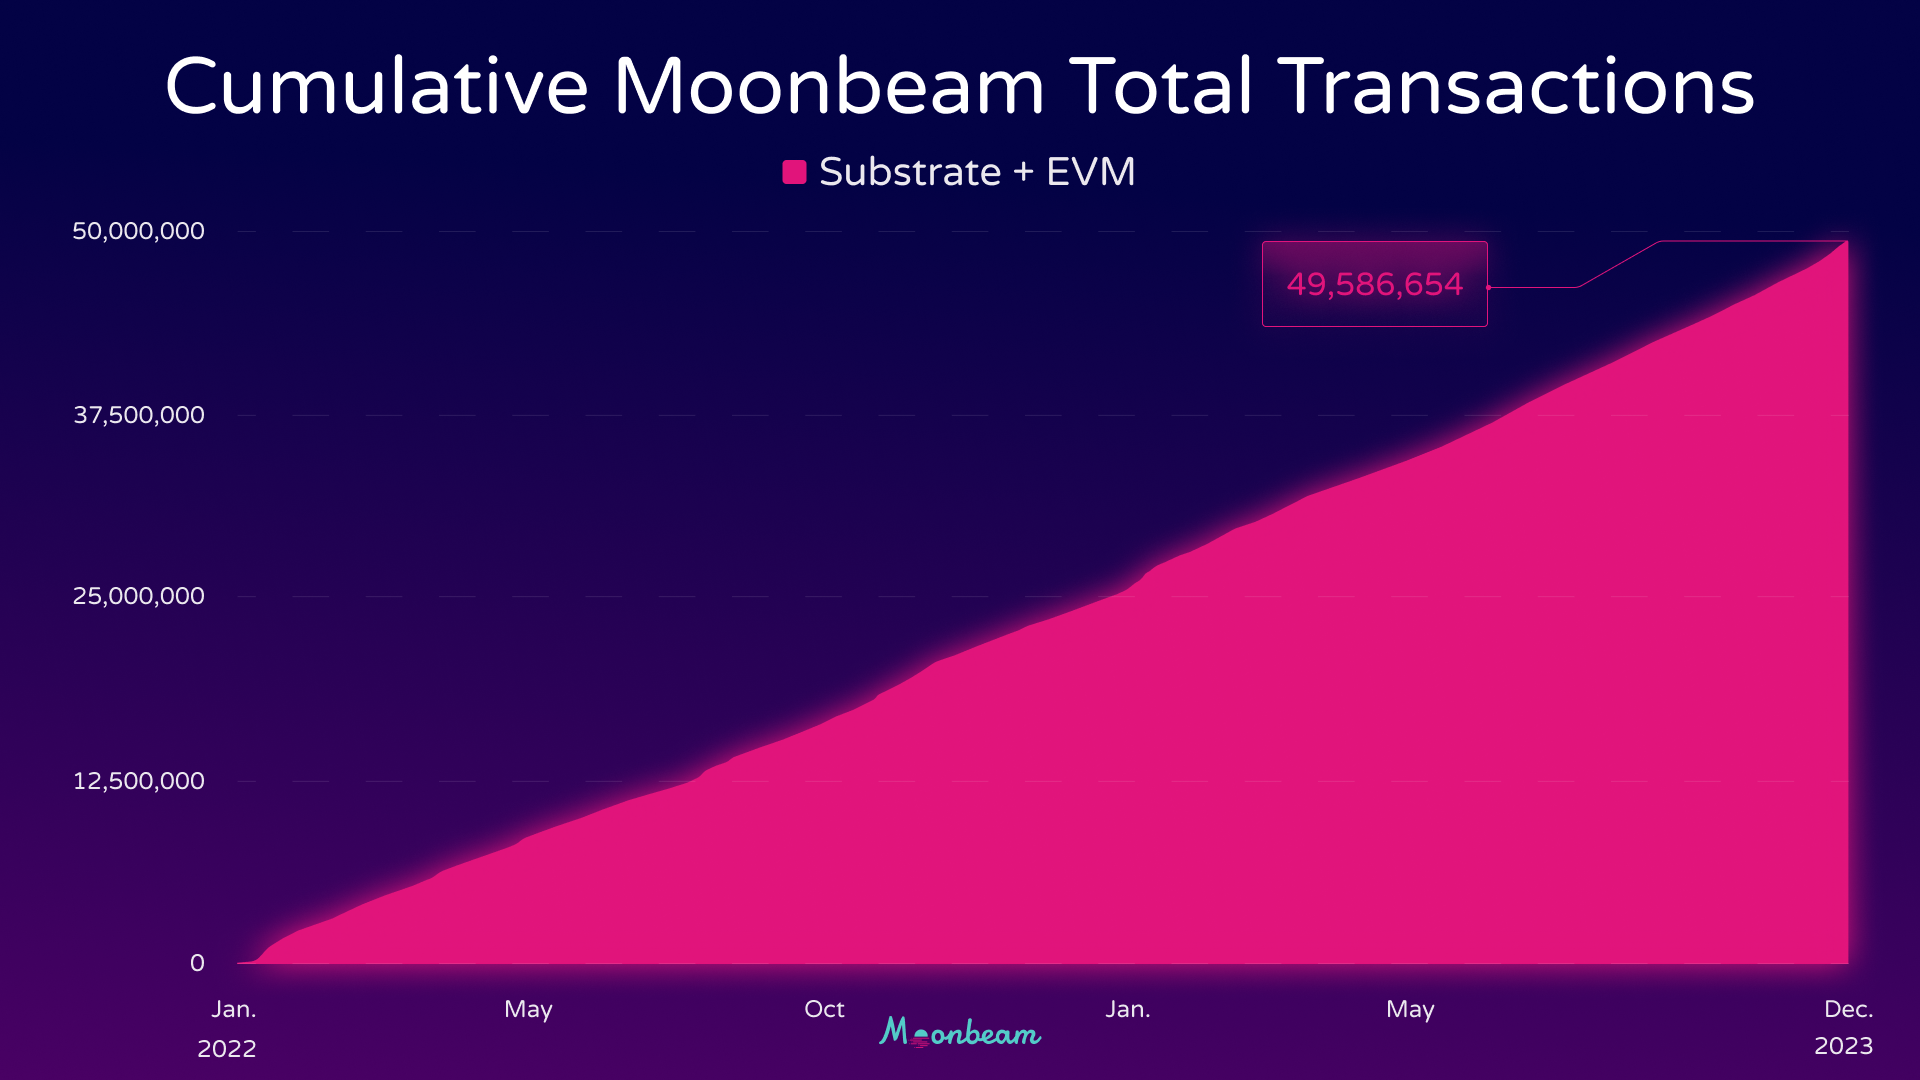 Graph of cumulative Moonbeam total transactions from January to December 2022